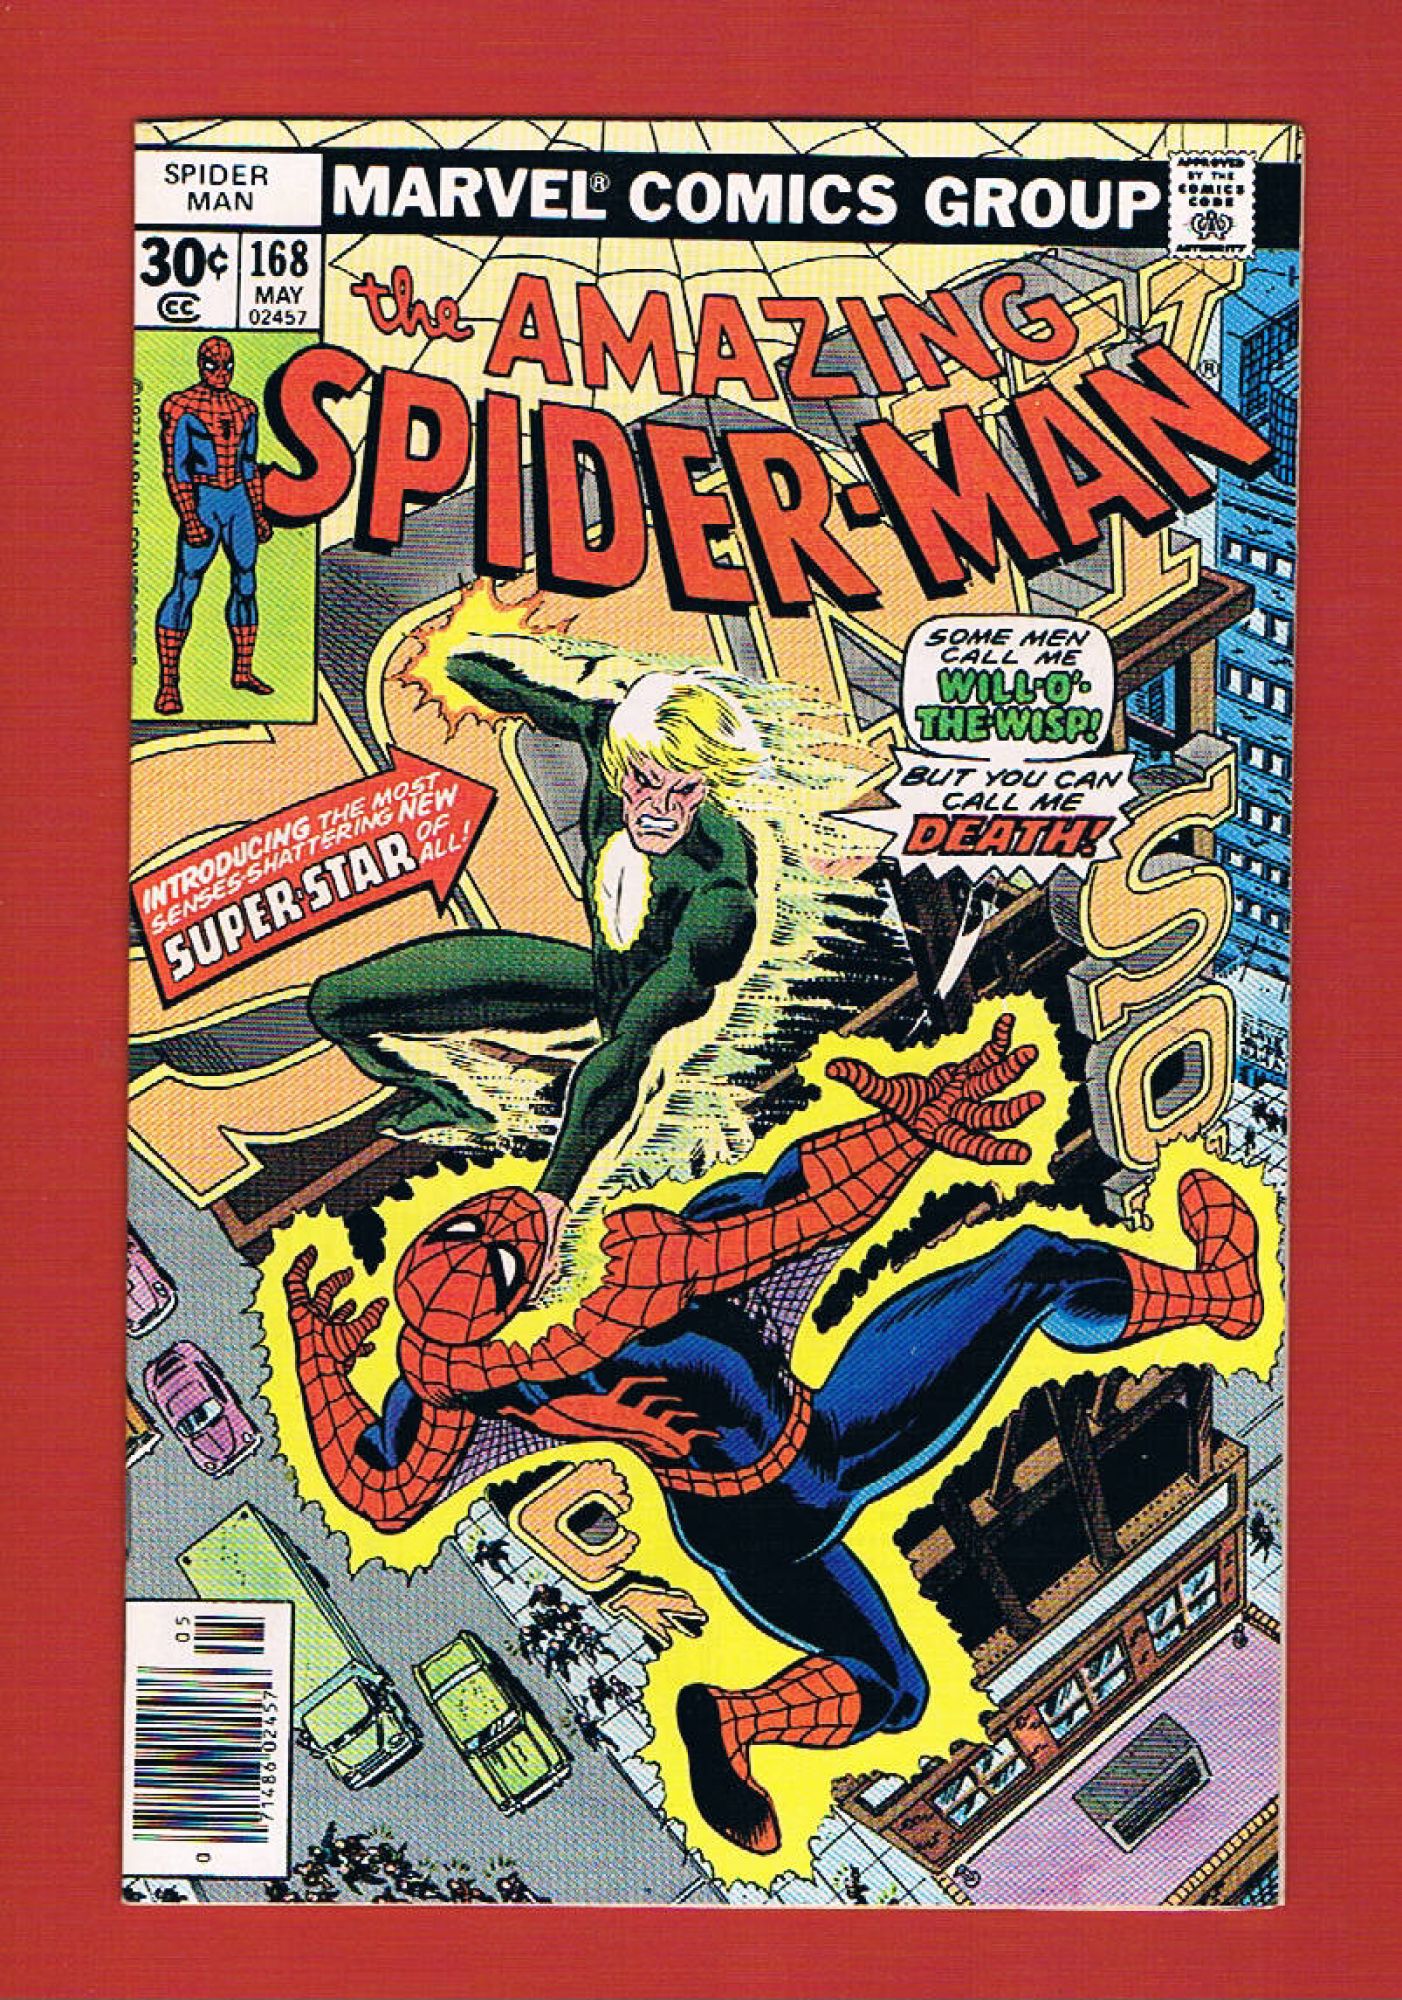 Amazing Spider-Man #168, May 1977, 7.0 FN/VF